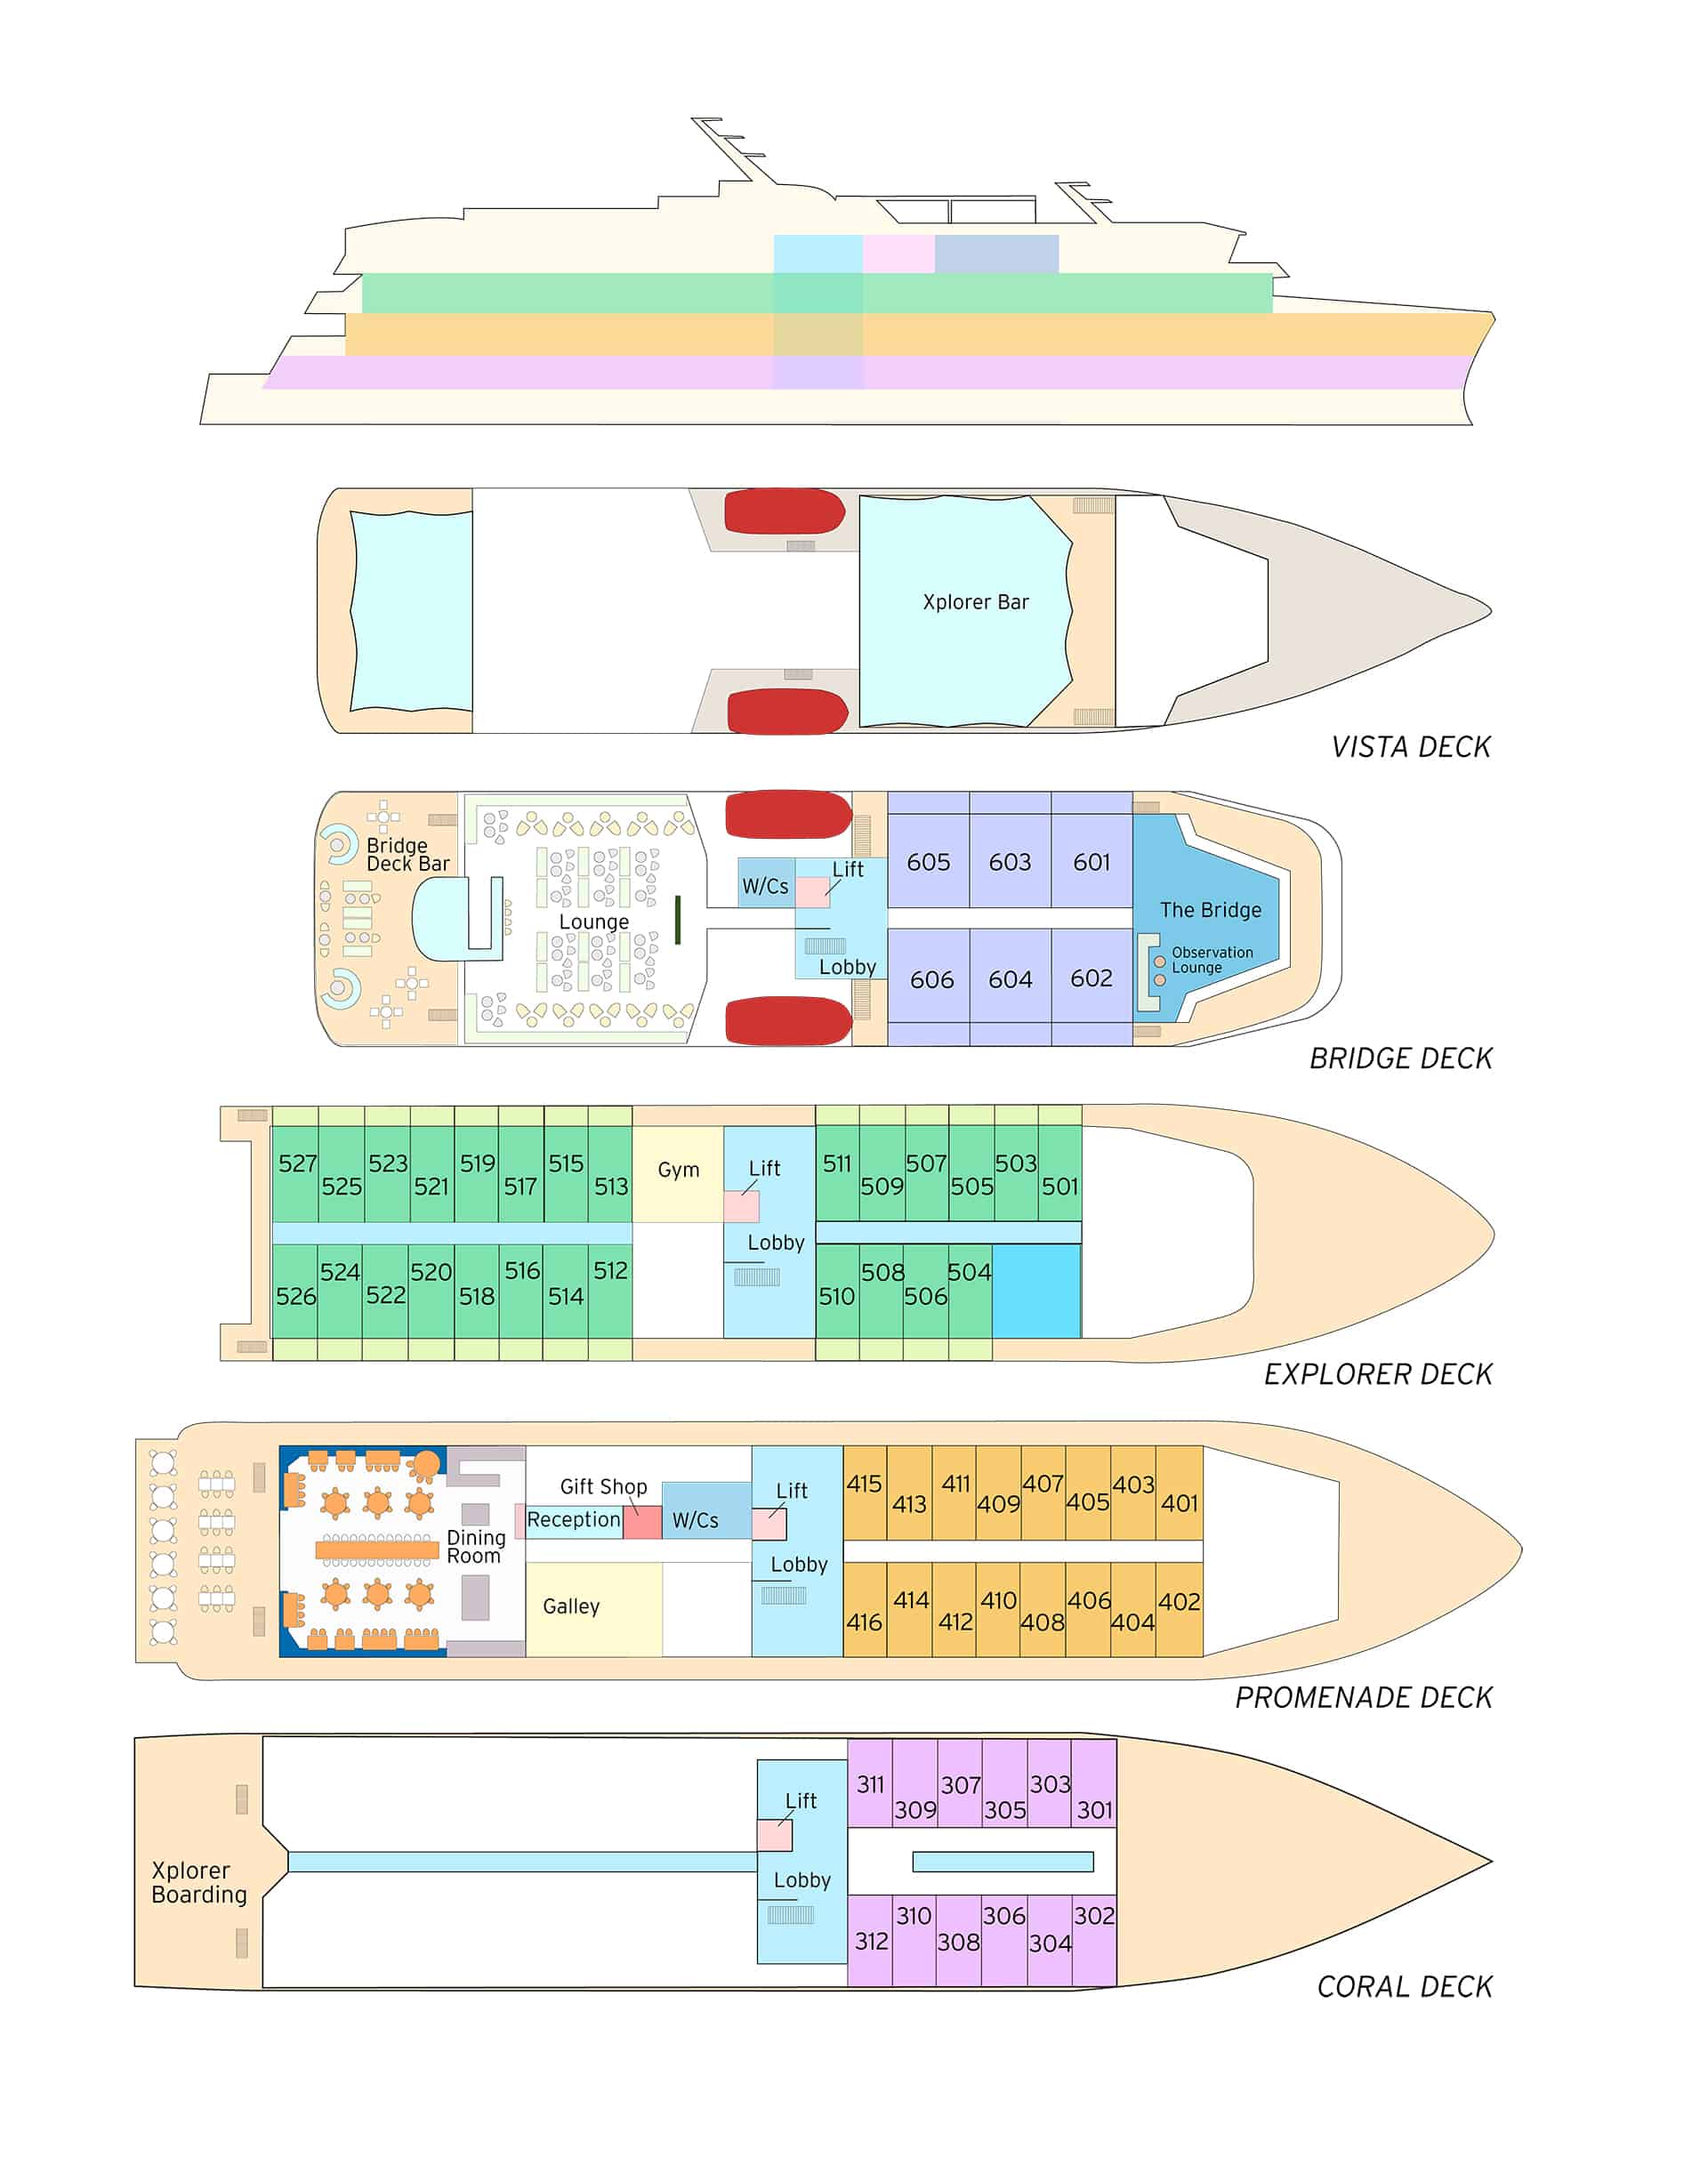 Deck plan of Coral Geographer small ship showing 5 decks & cabins for 120 passengers.